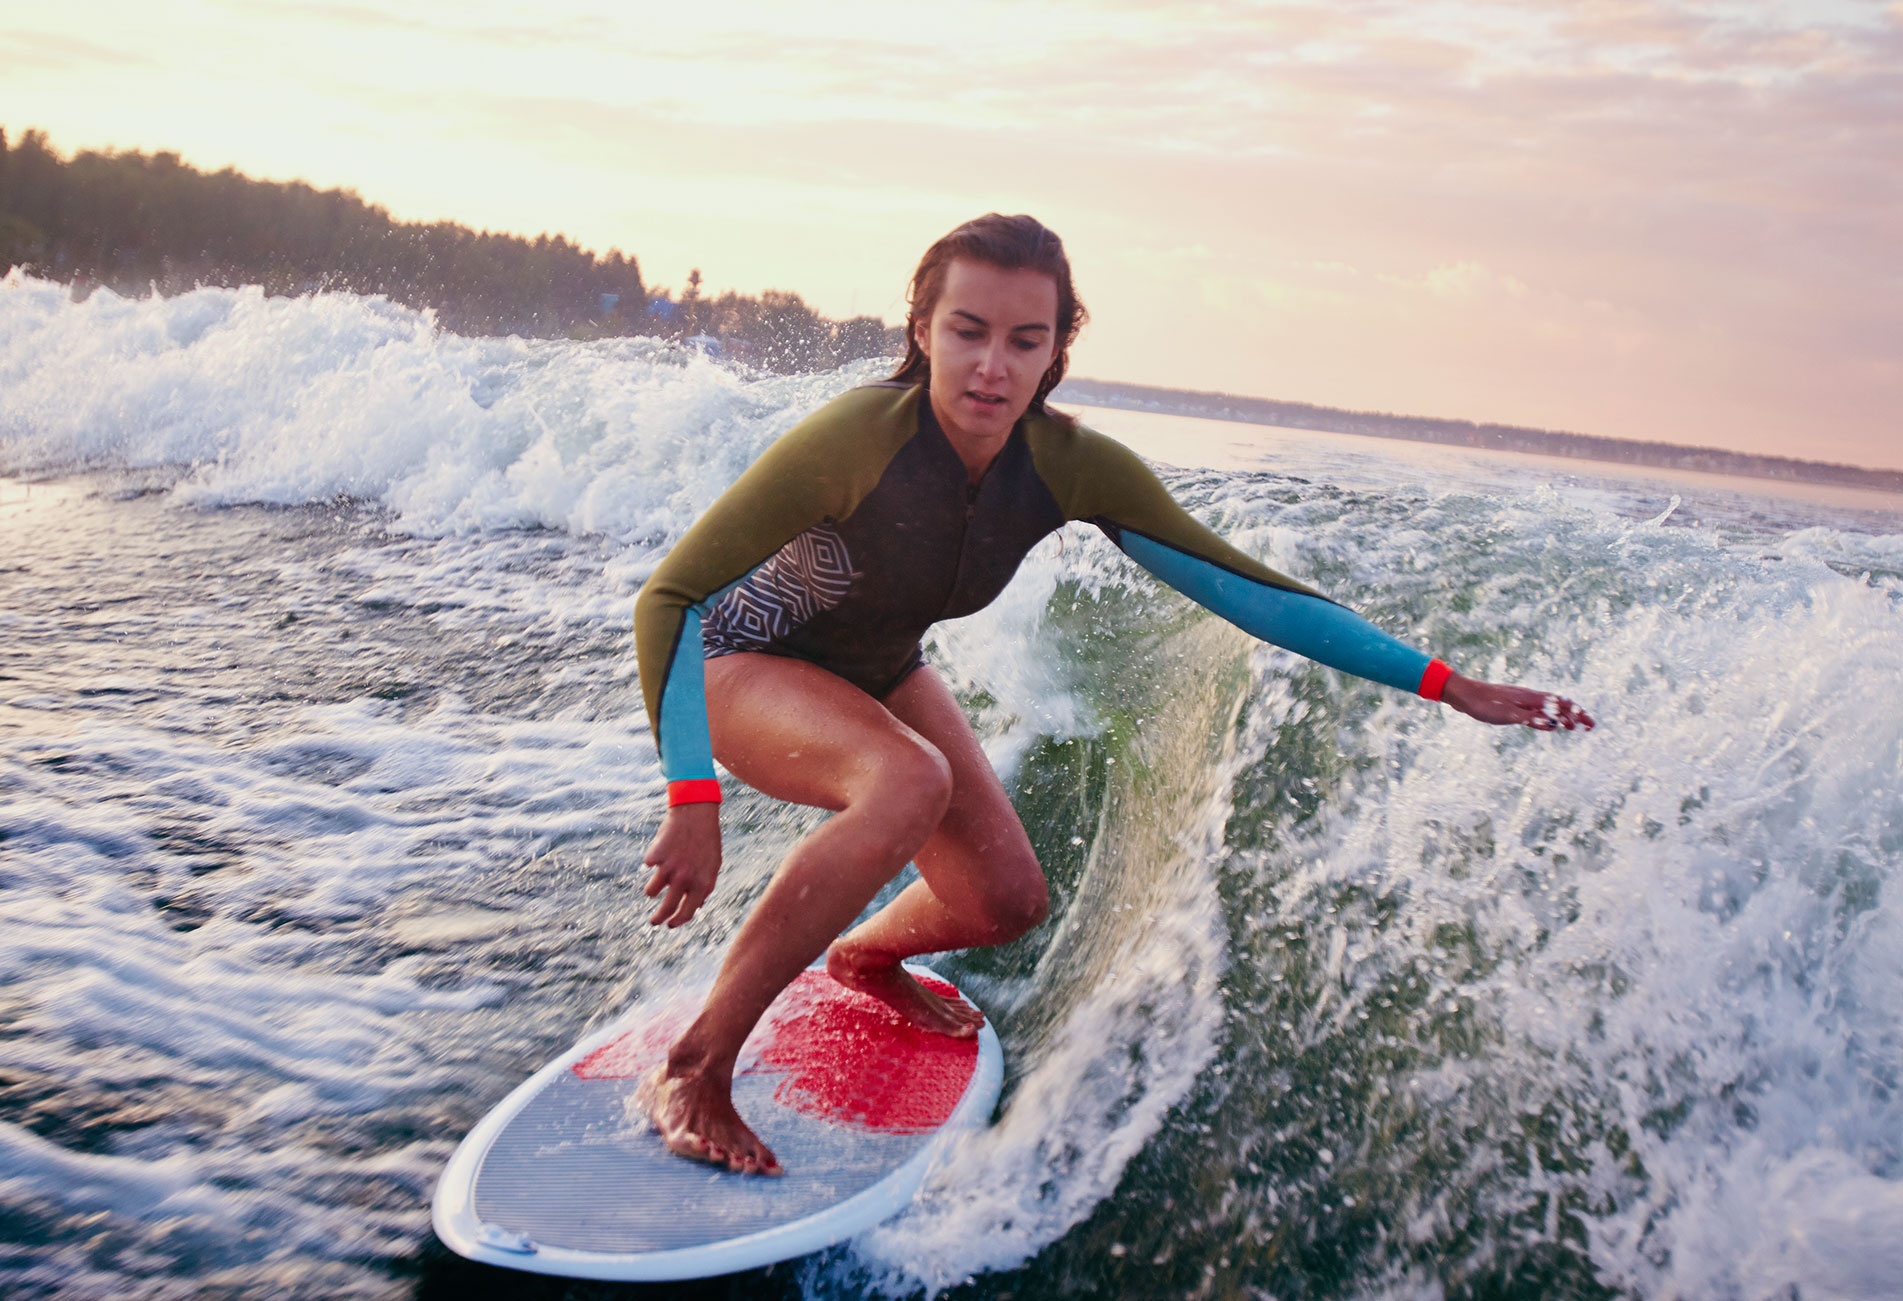 A Surfboard Success Story You’ll Never Believe